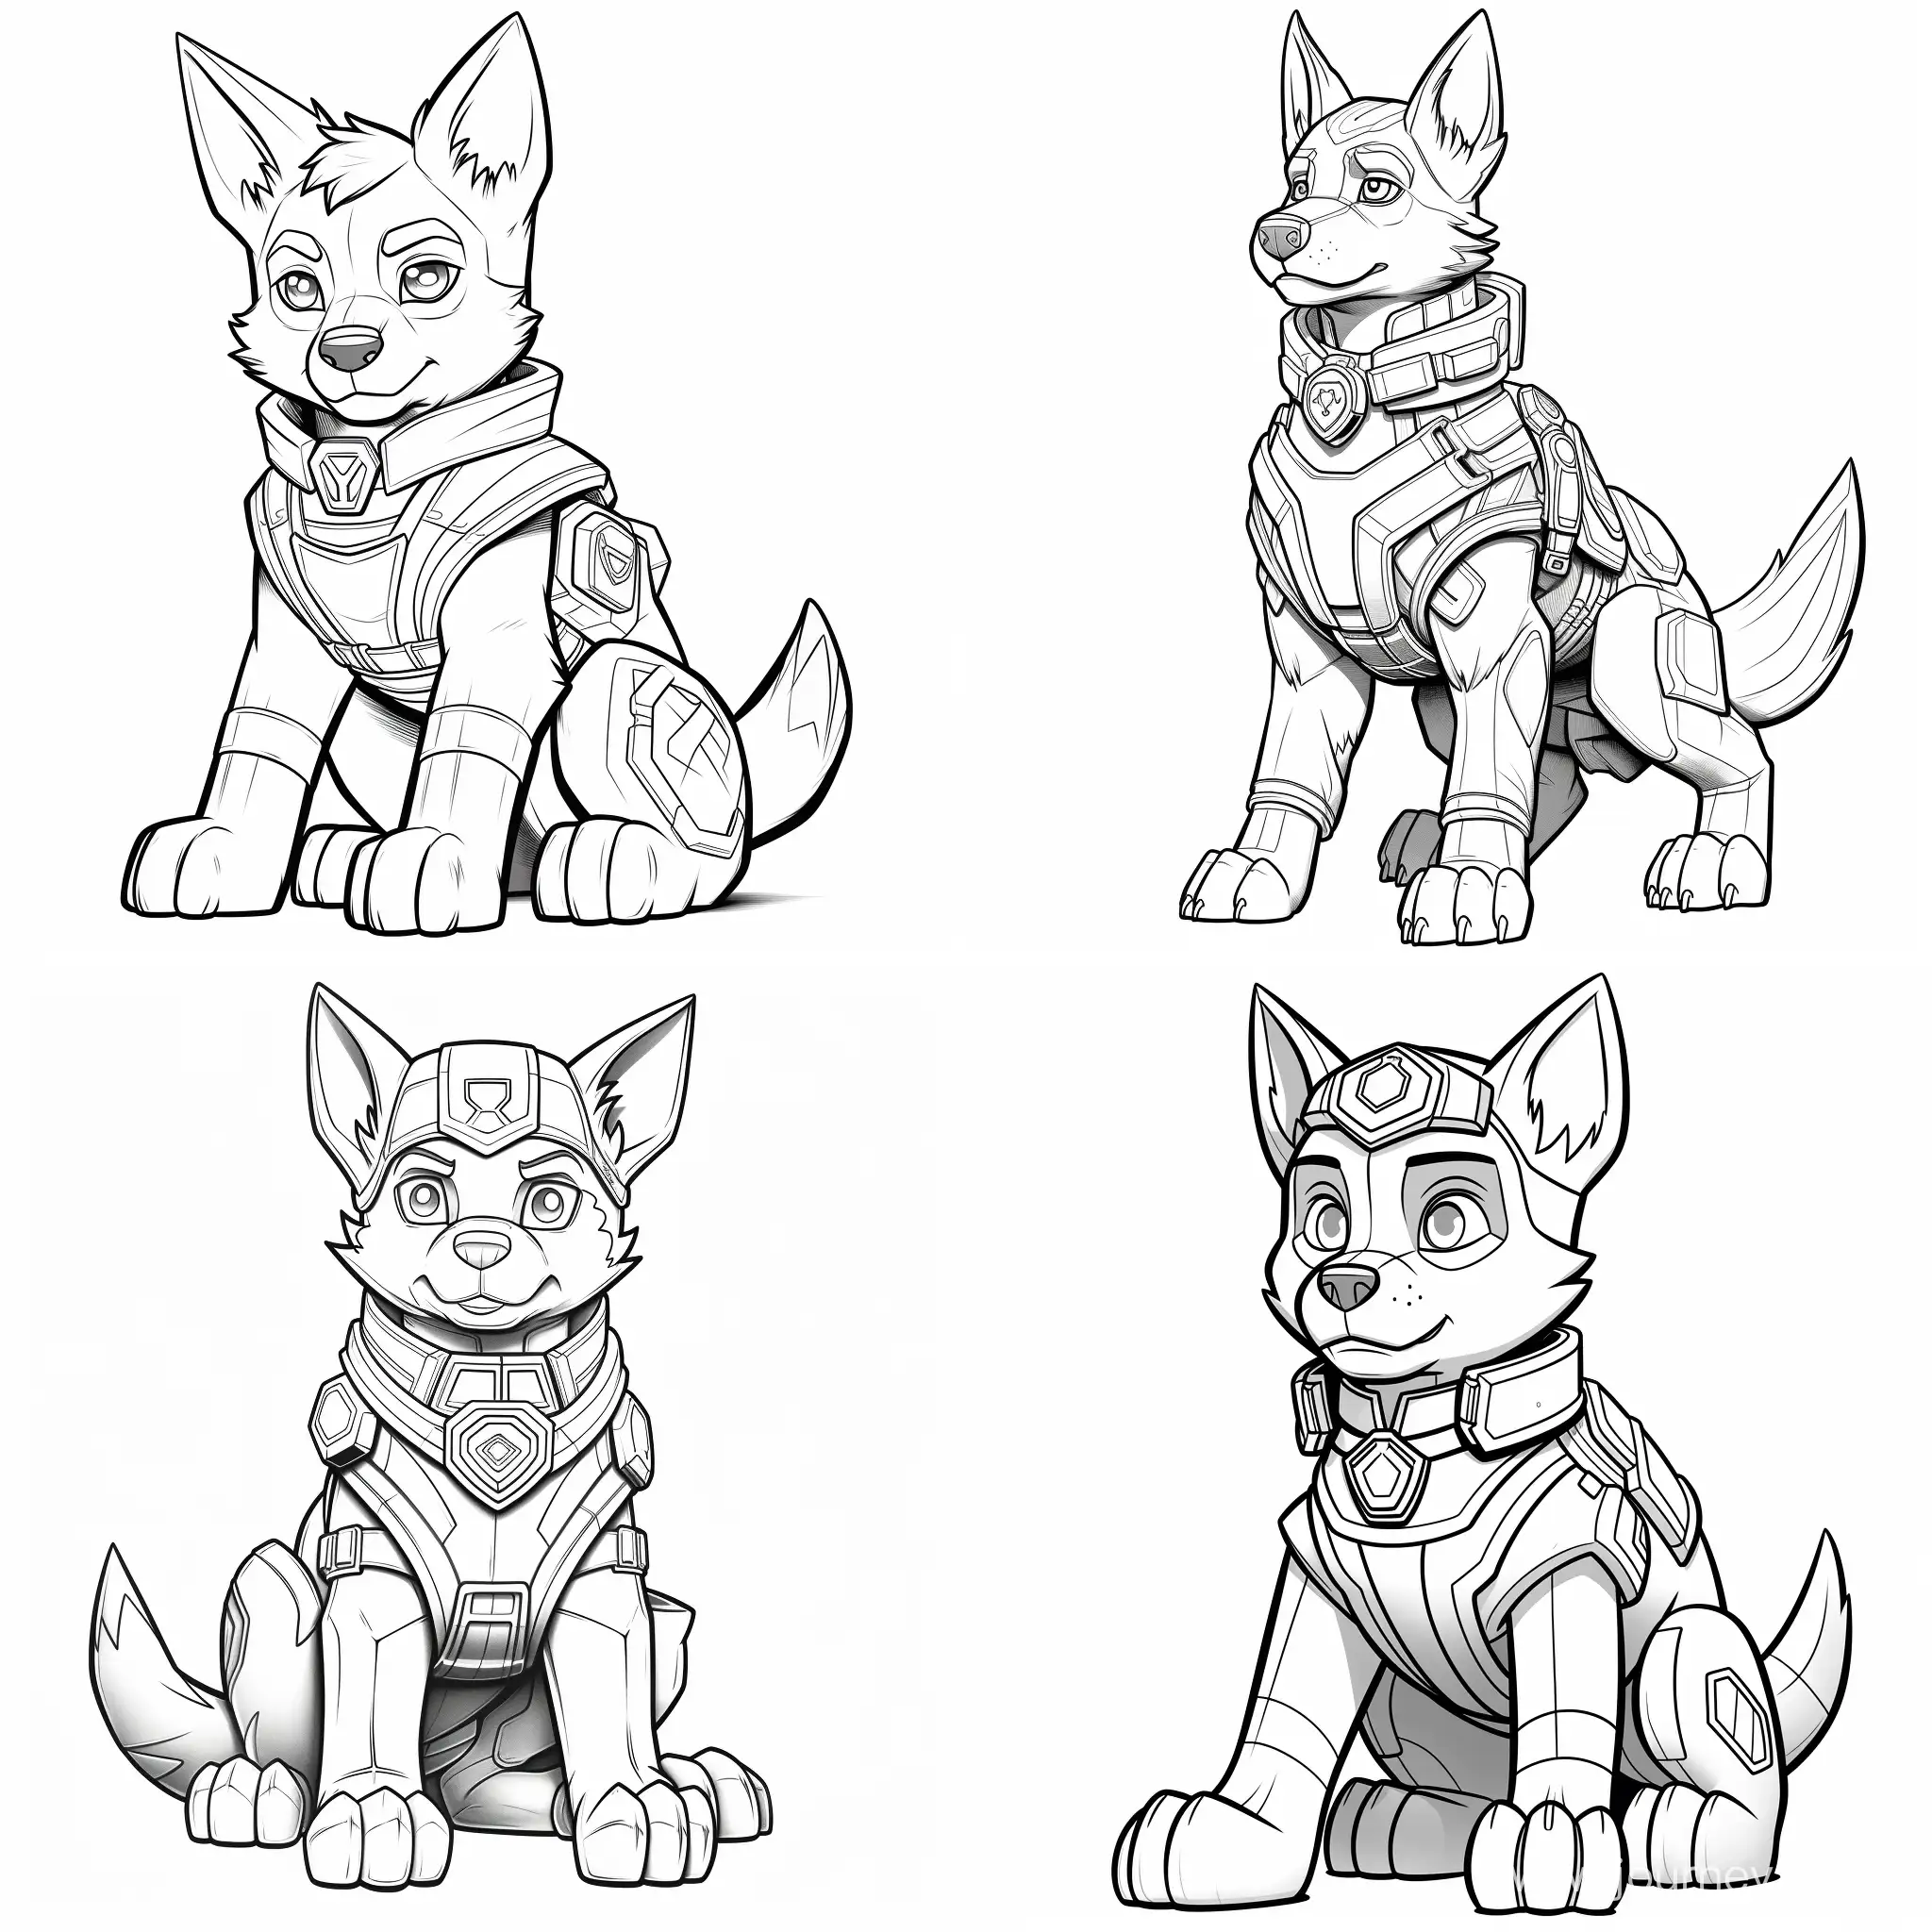 Superhero-Puppies-Coloring-Page-for-Marvel-Paw-Patrol-Fans